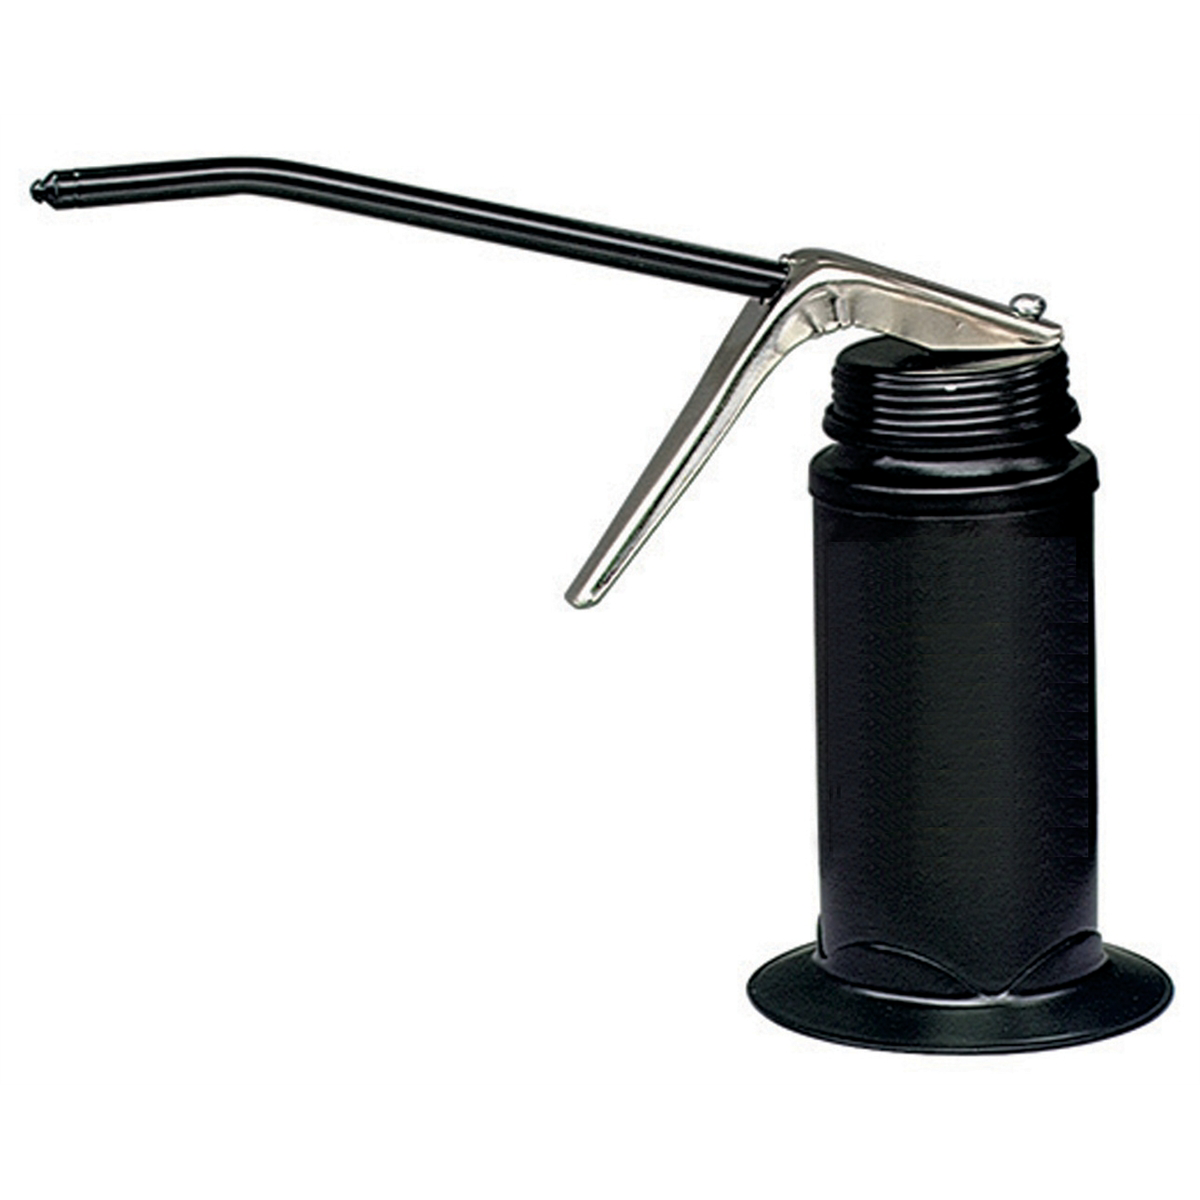 Plews 50-515 Epoxy Finish Pistol Oiler with Base Holder and 6 Rigid Spout - image 1 of 2